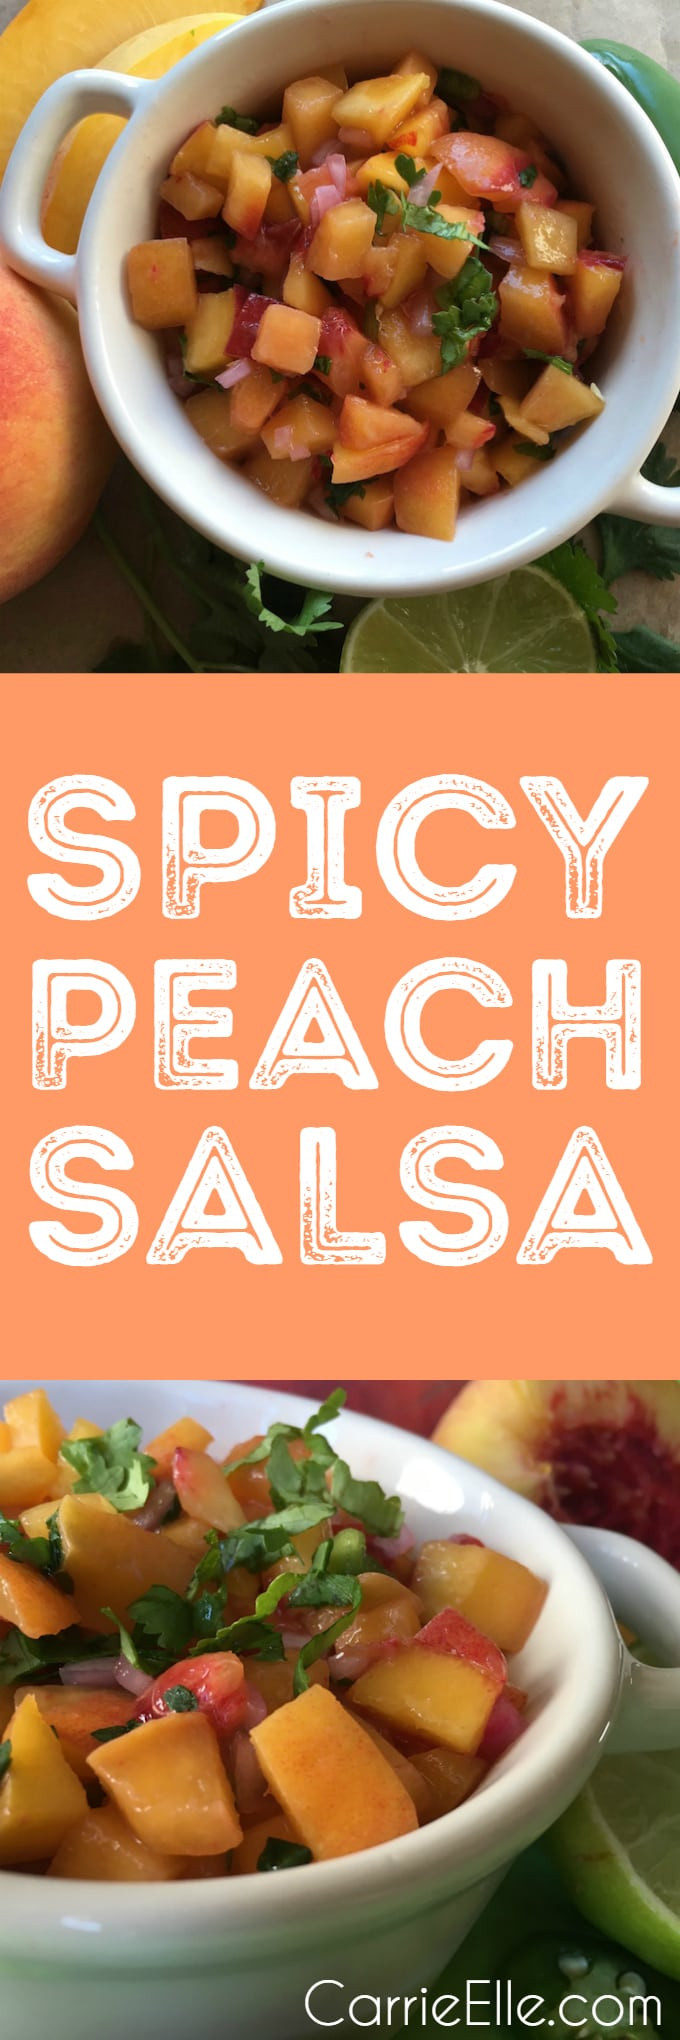 Spicy Salsa Recipe
 Spicy Peach Salsa 21 Day Fix and Weight Watchers approved